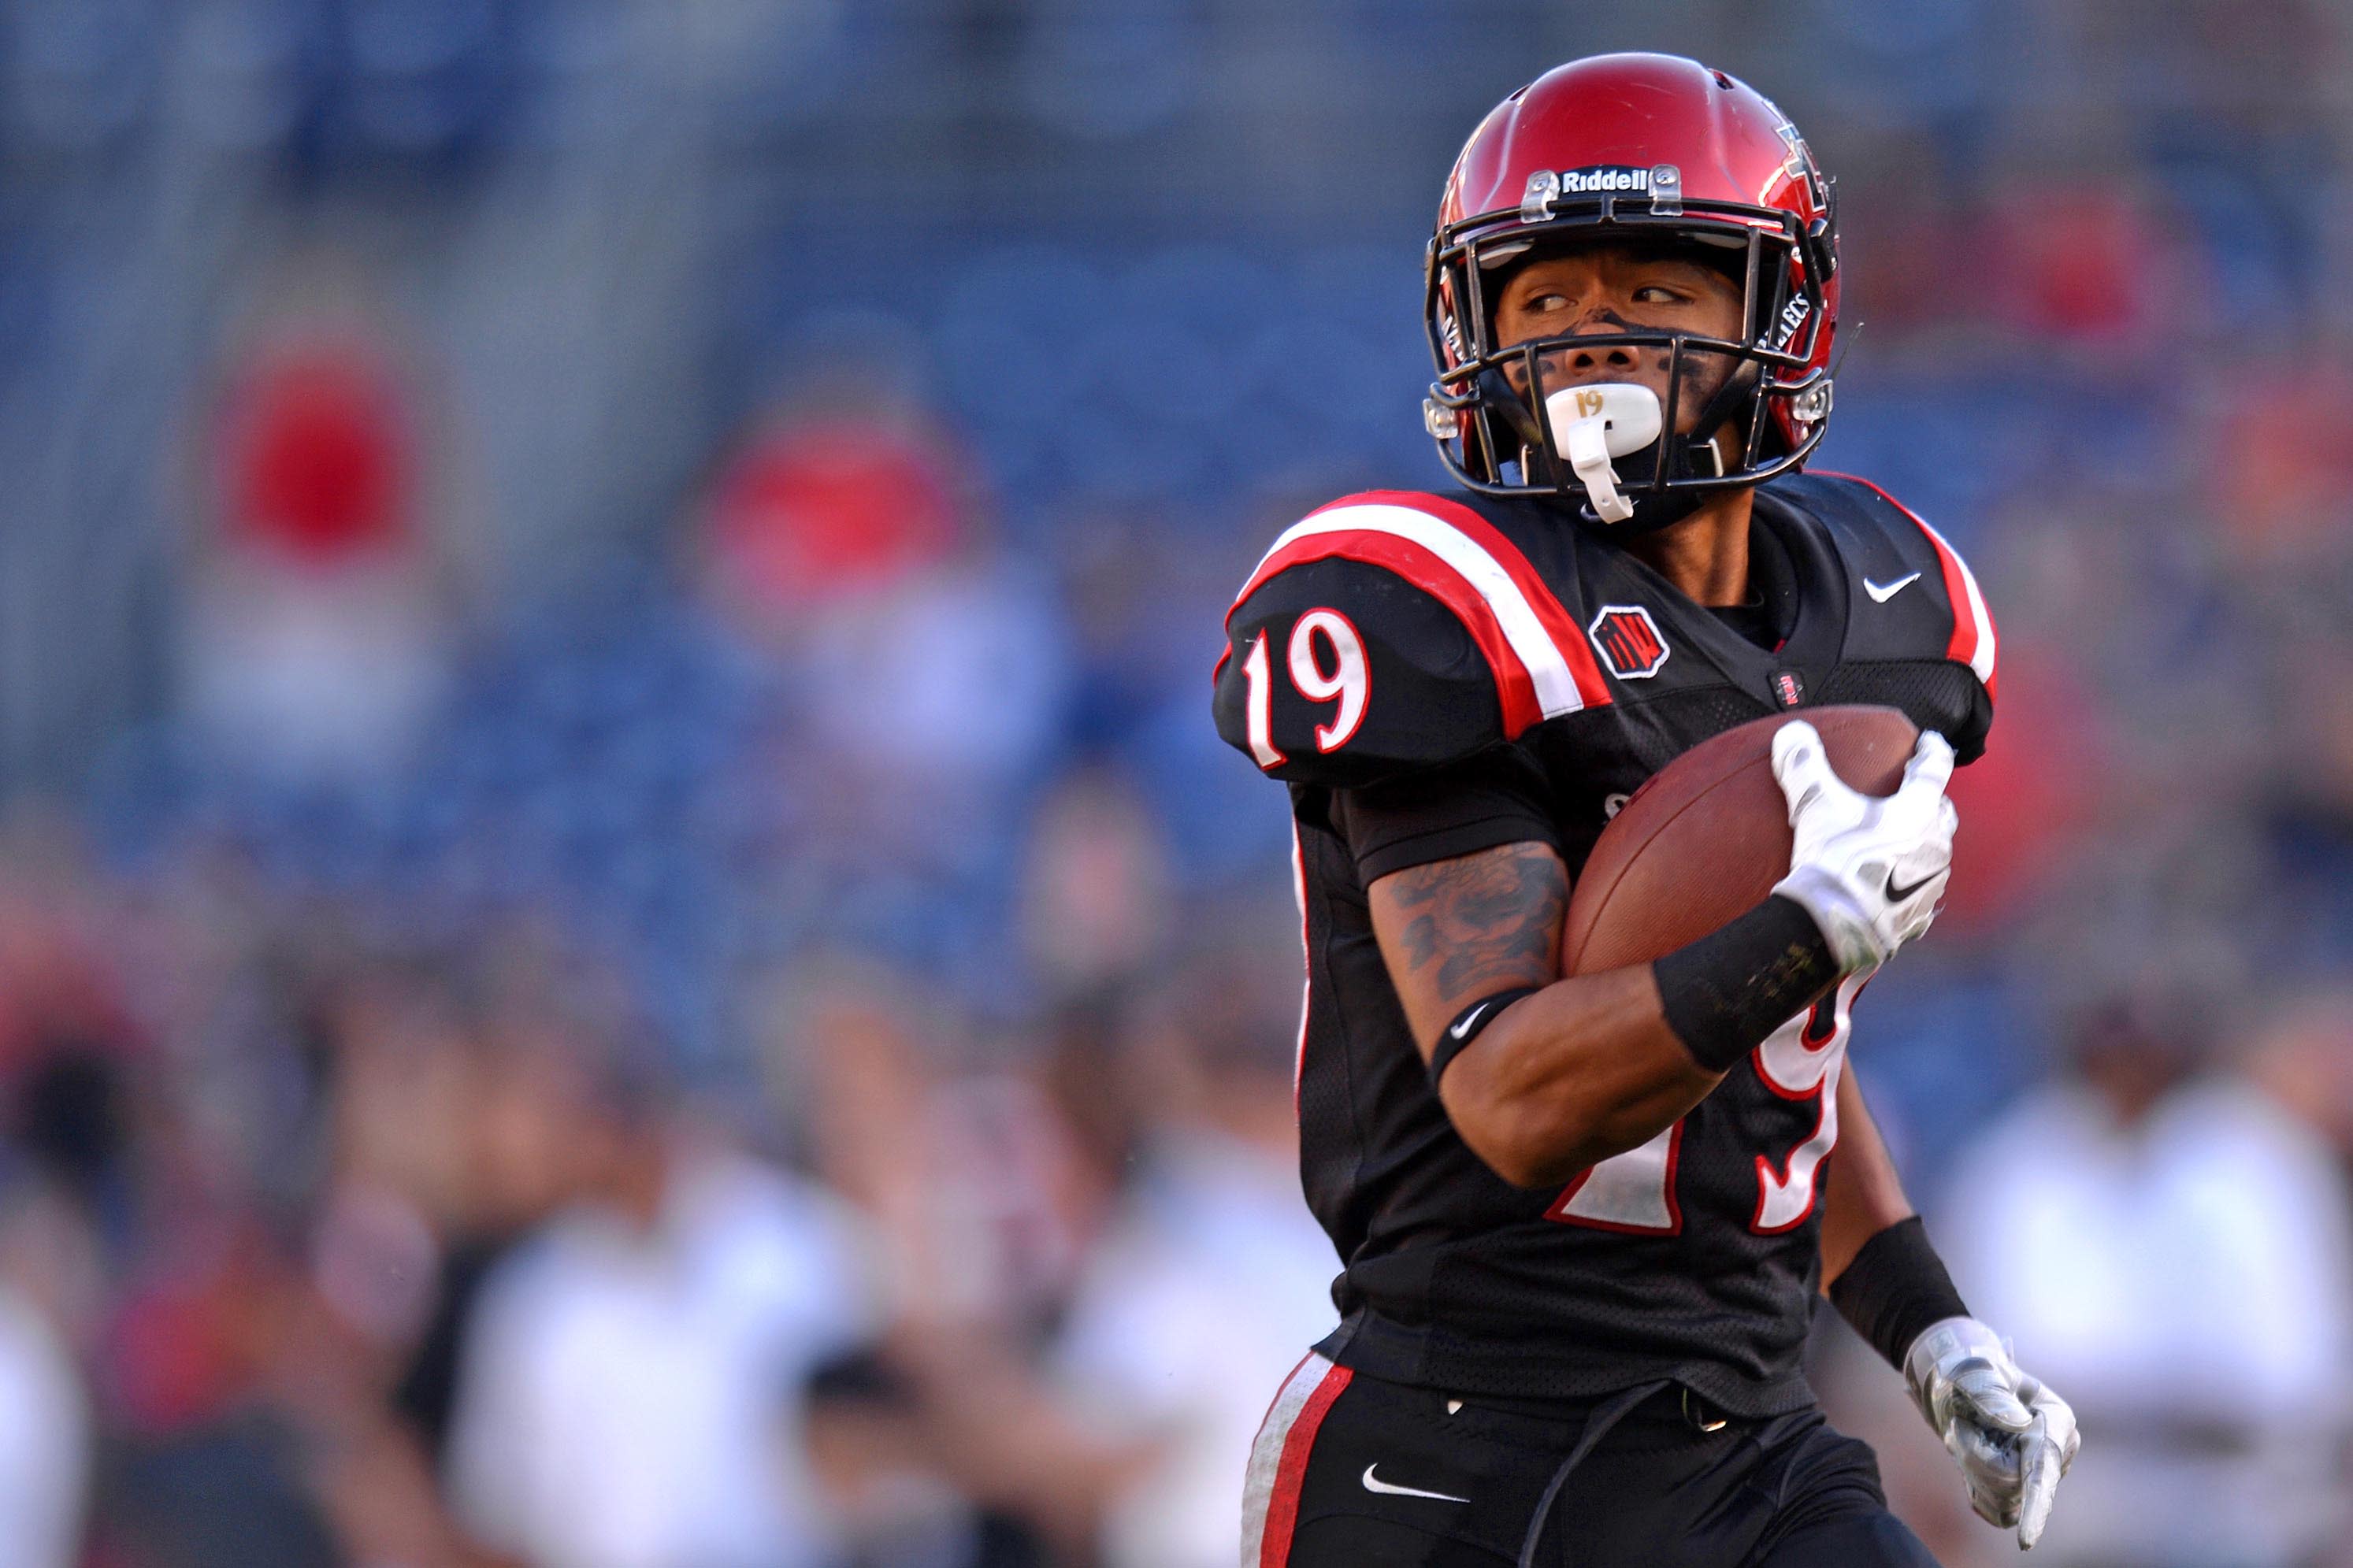 Poinsettia Bowl It's a home game for San Diego State